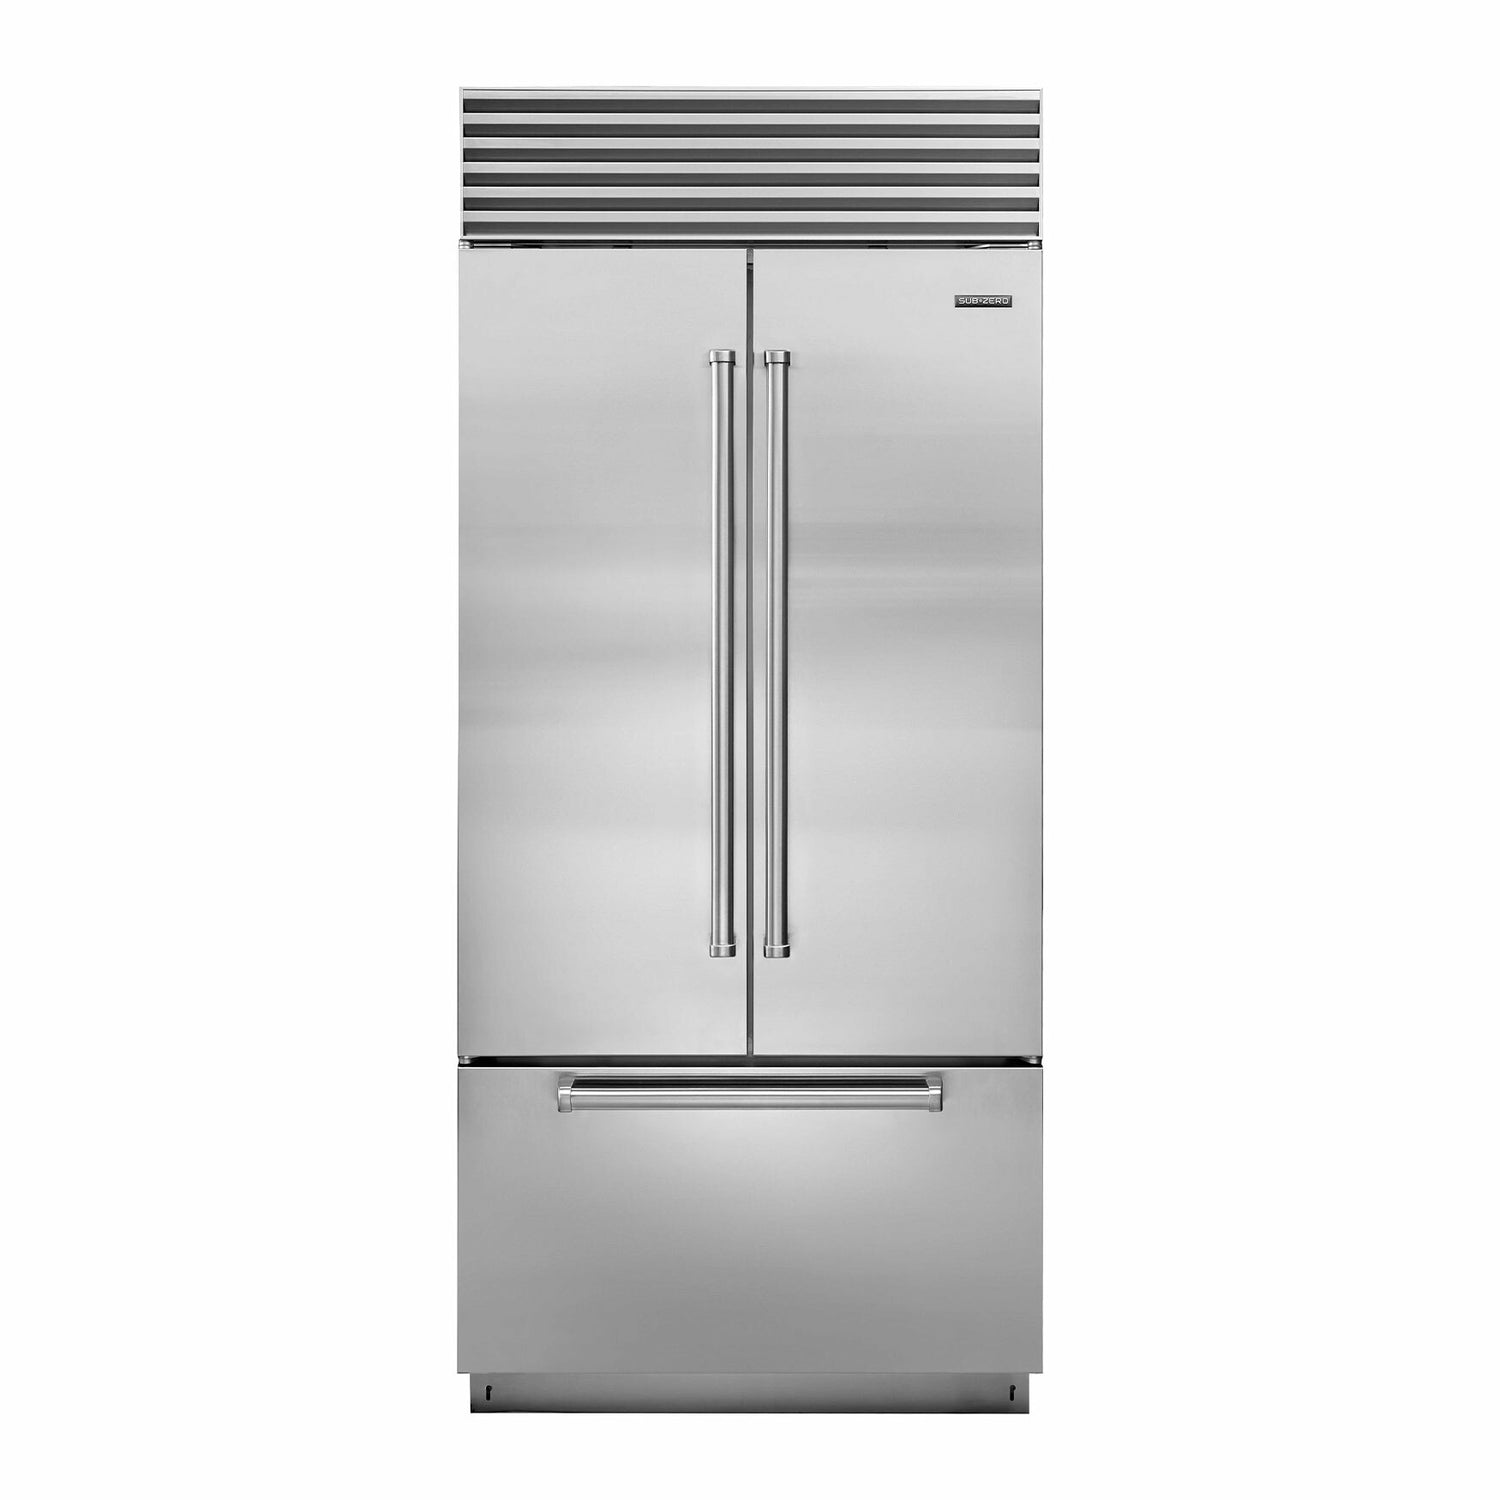 Sub-Zero Built-in Over-and-Under Refrigerator/Freezer with French Door - 2134 x 914mm